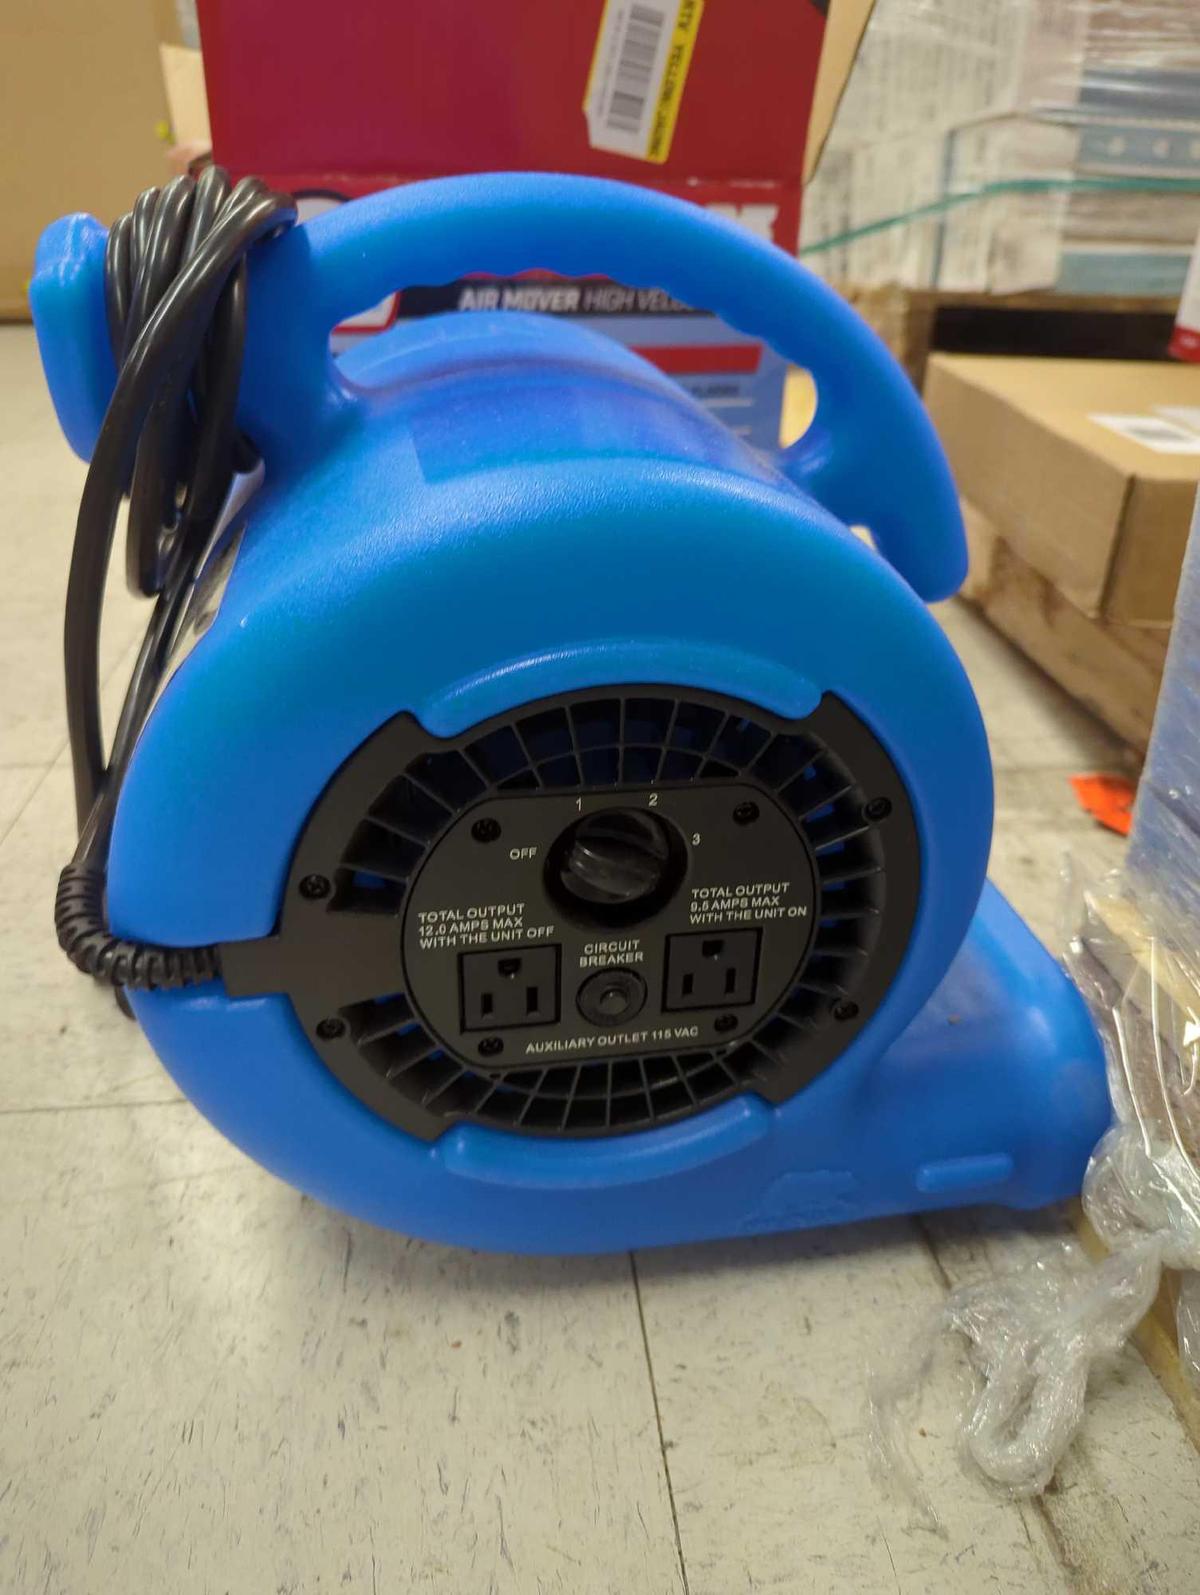 B-Air 1/4 HP Air Mover Blower Fan for Water Damage Restoration Carpet Dryer Floor Home and Plumbing